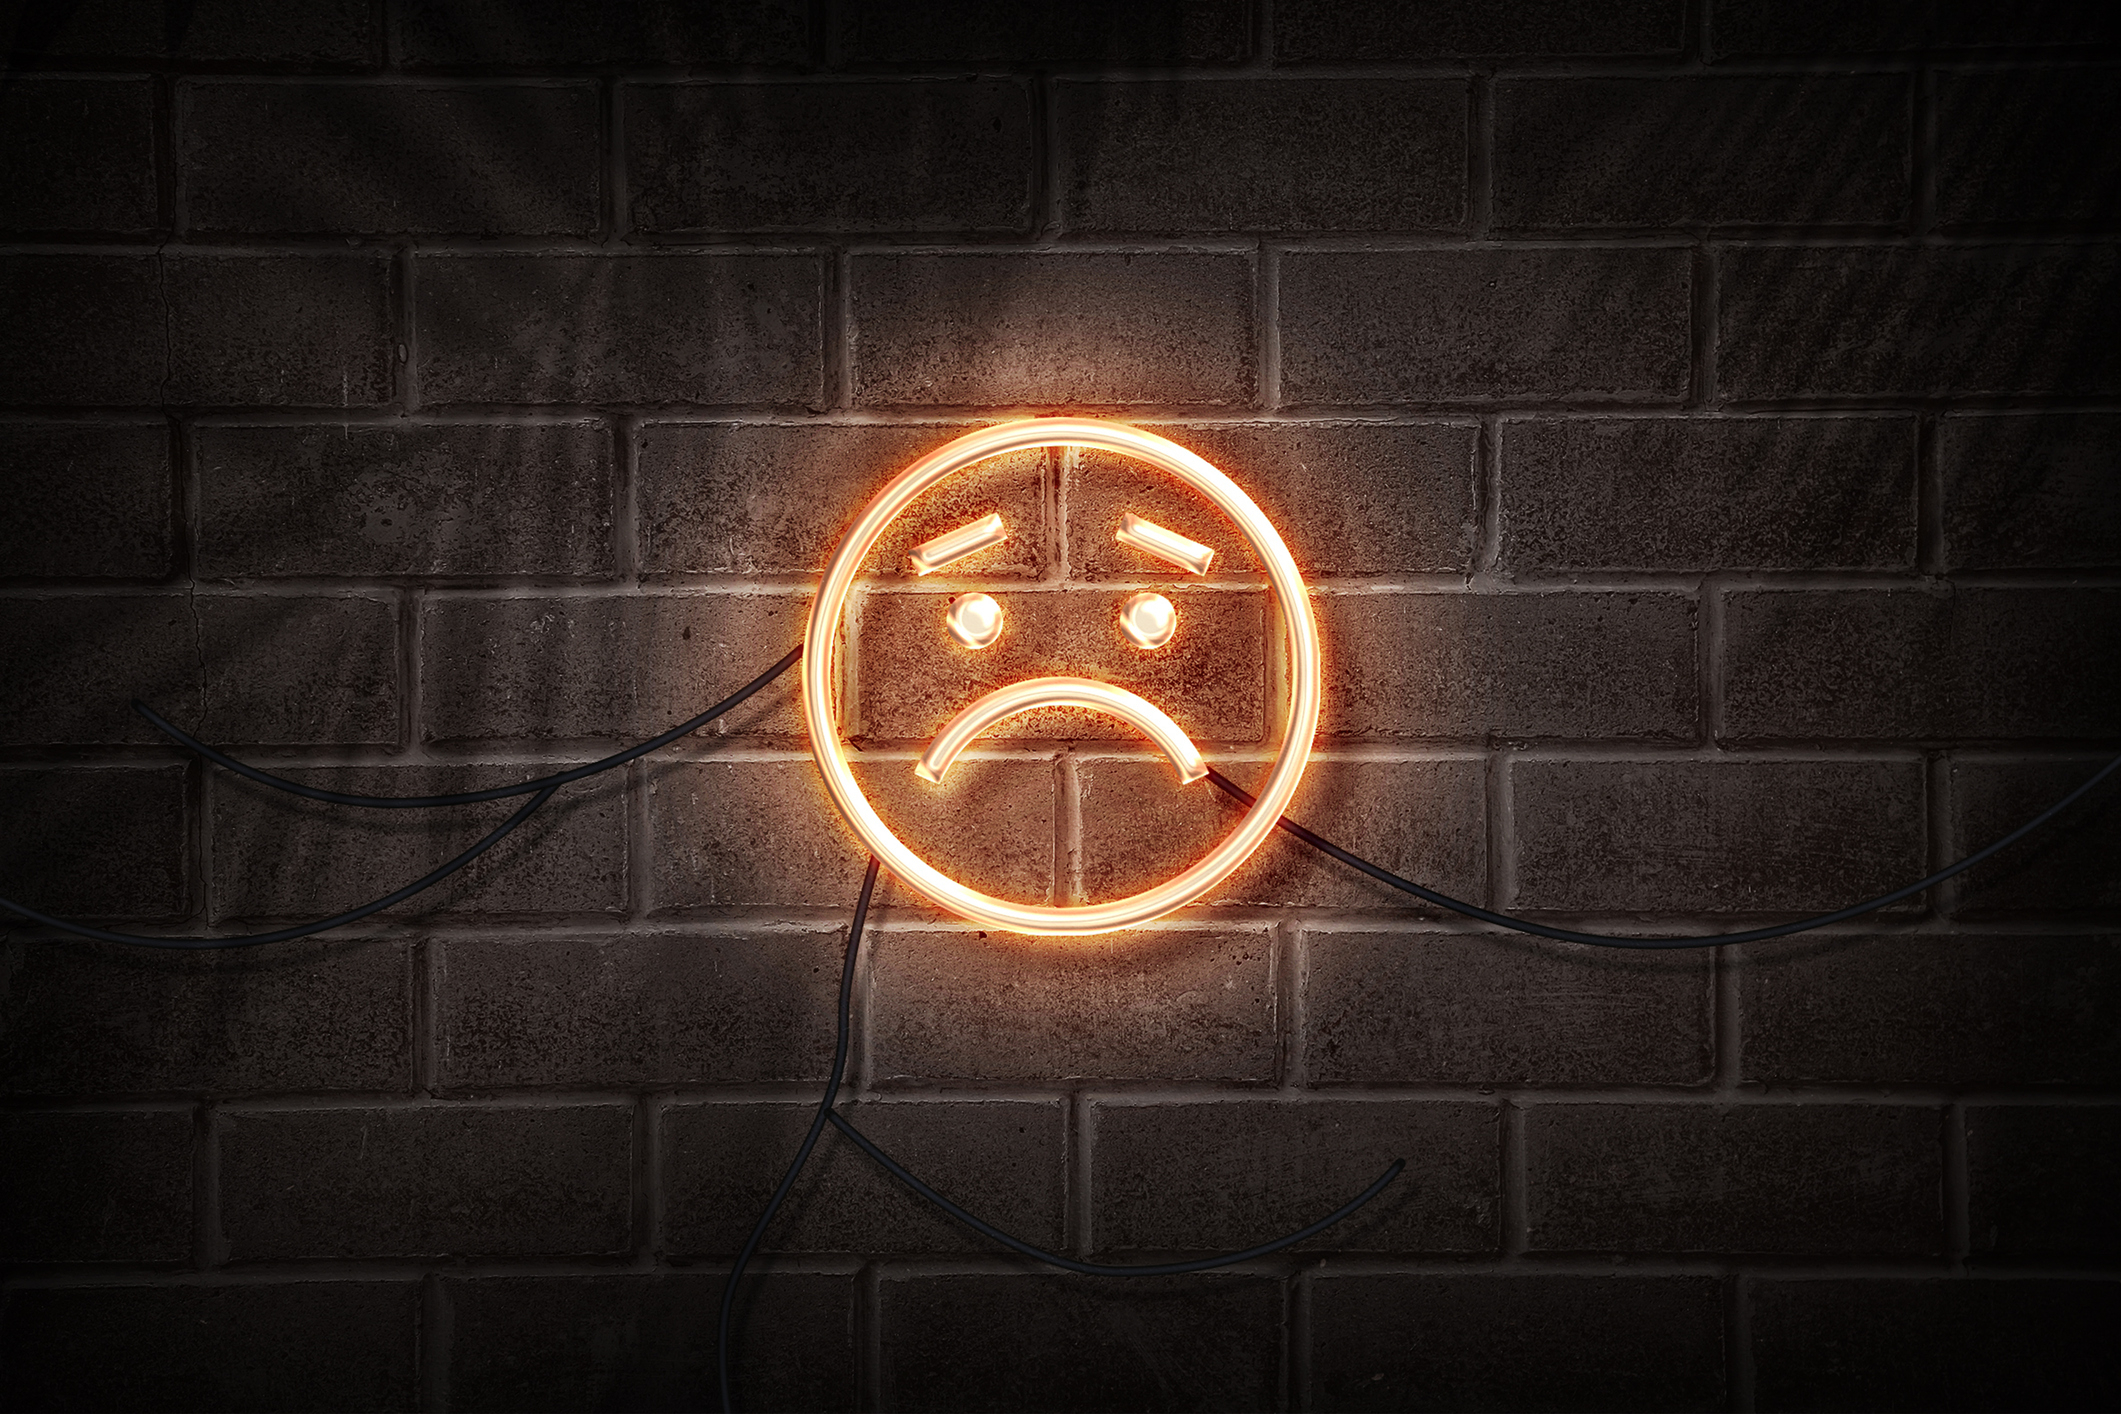 Neon sign of a frowning face on a brick wall